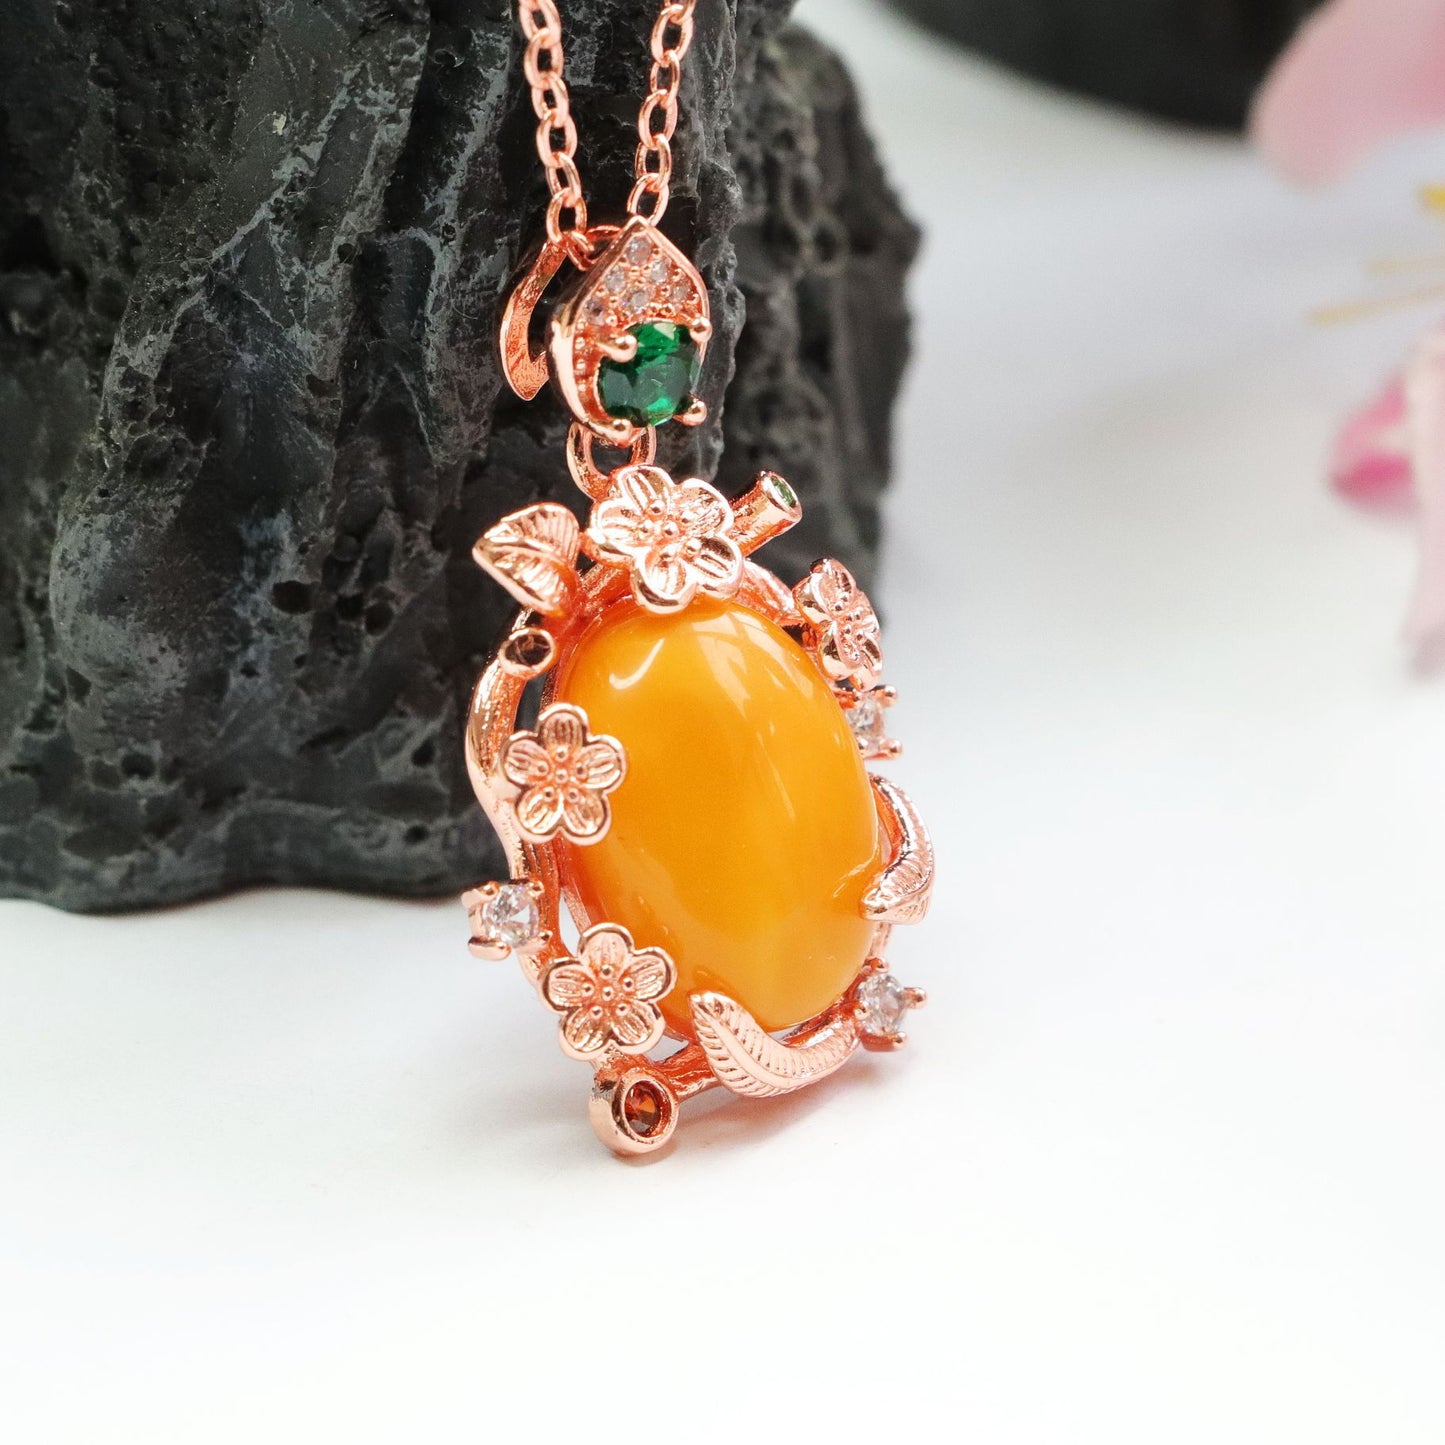 Amber Beeswax Pendant with Zircon Garland Necklace - Sterling Silver Necklace